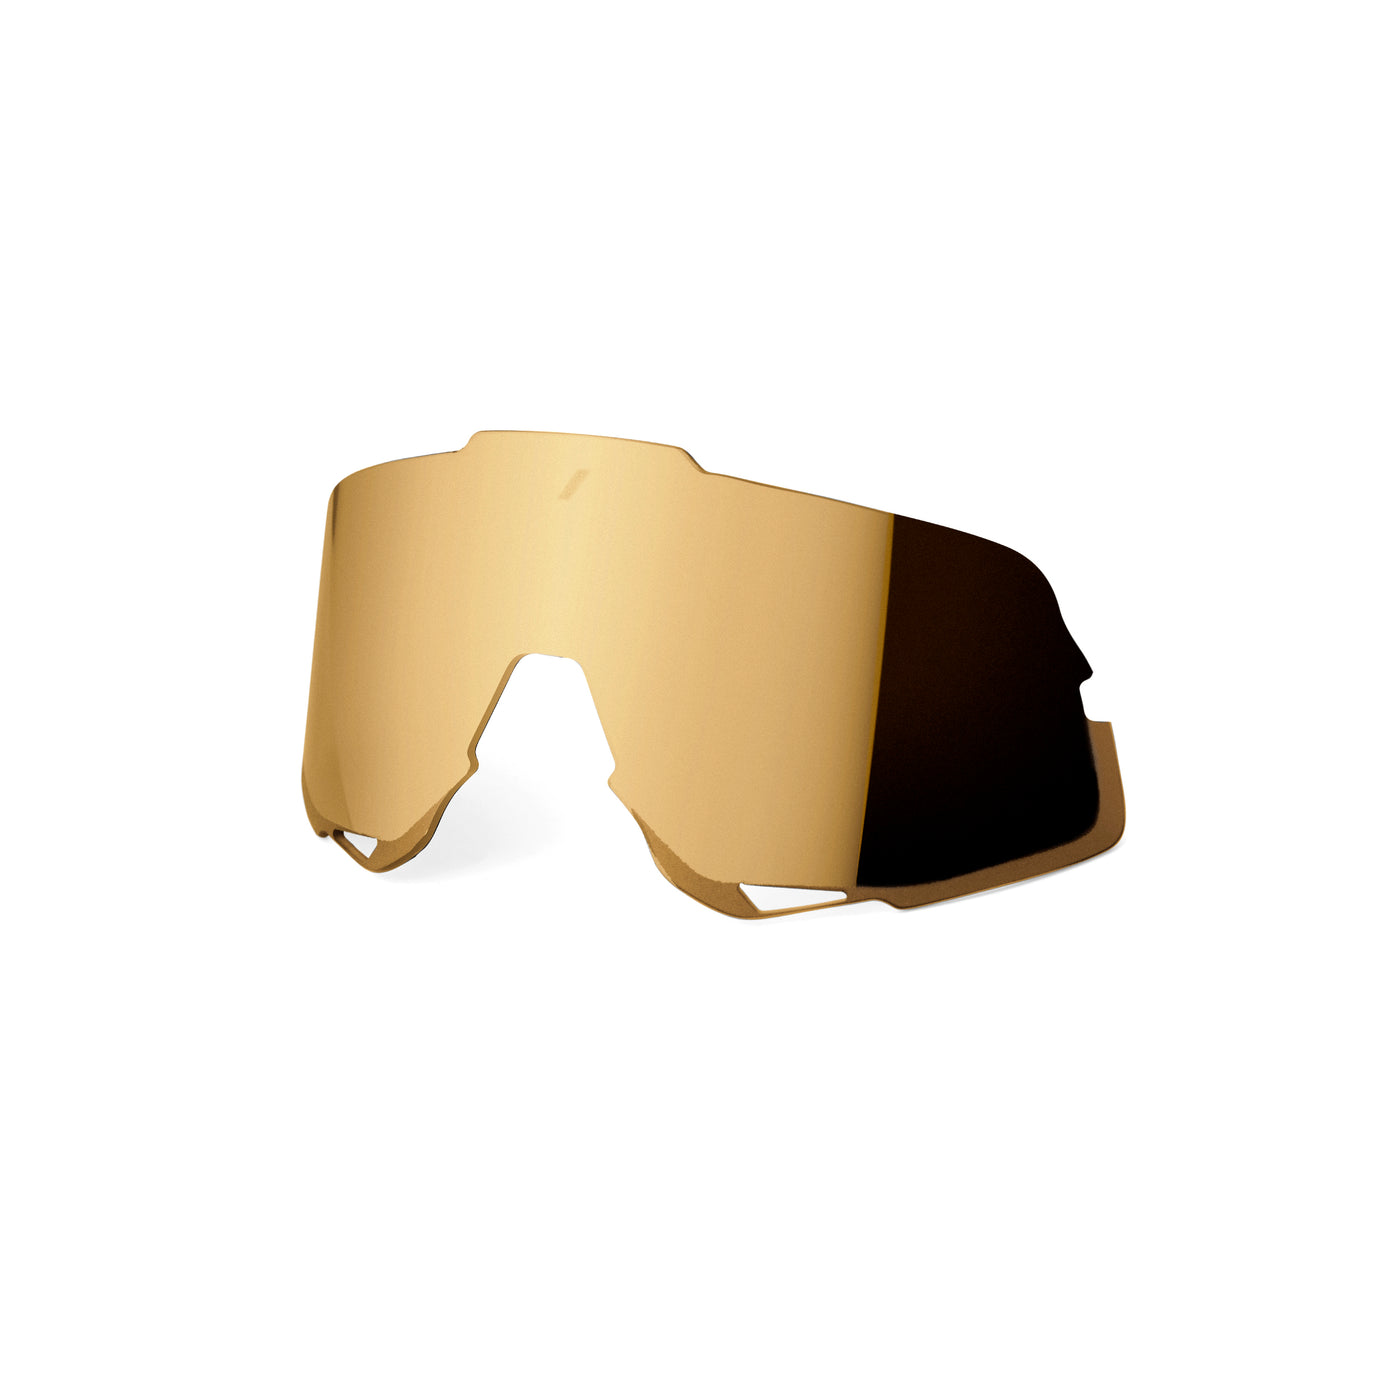 GLENDALE Replacement Lens - Bronze Multilayer Mirror